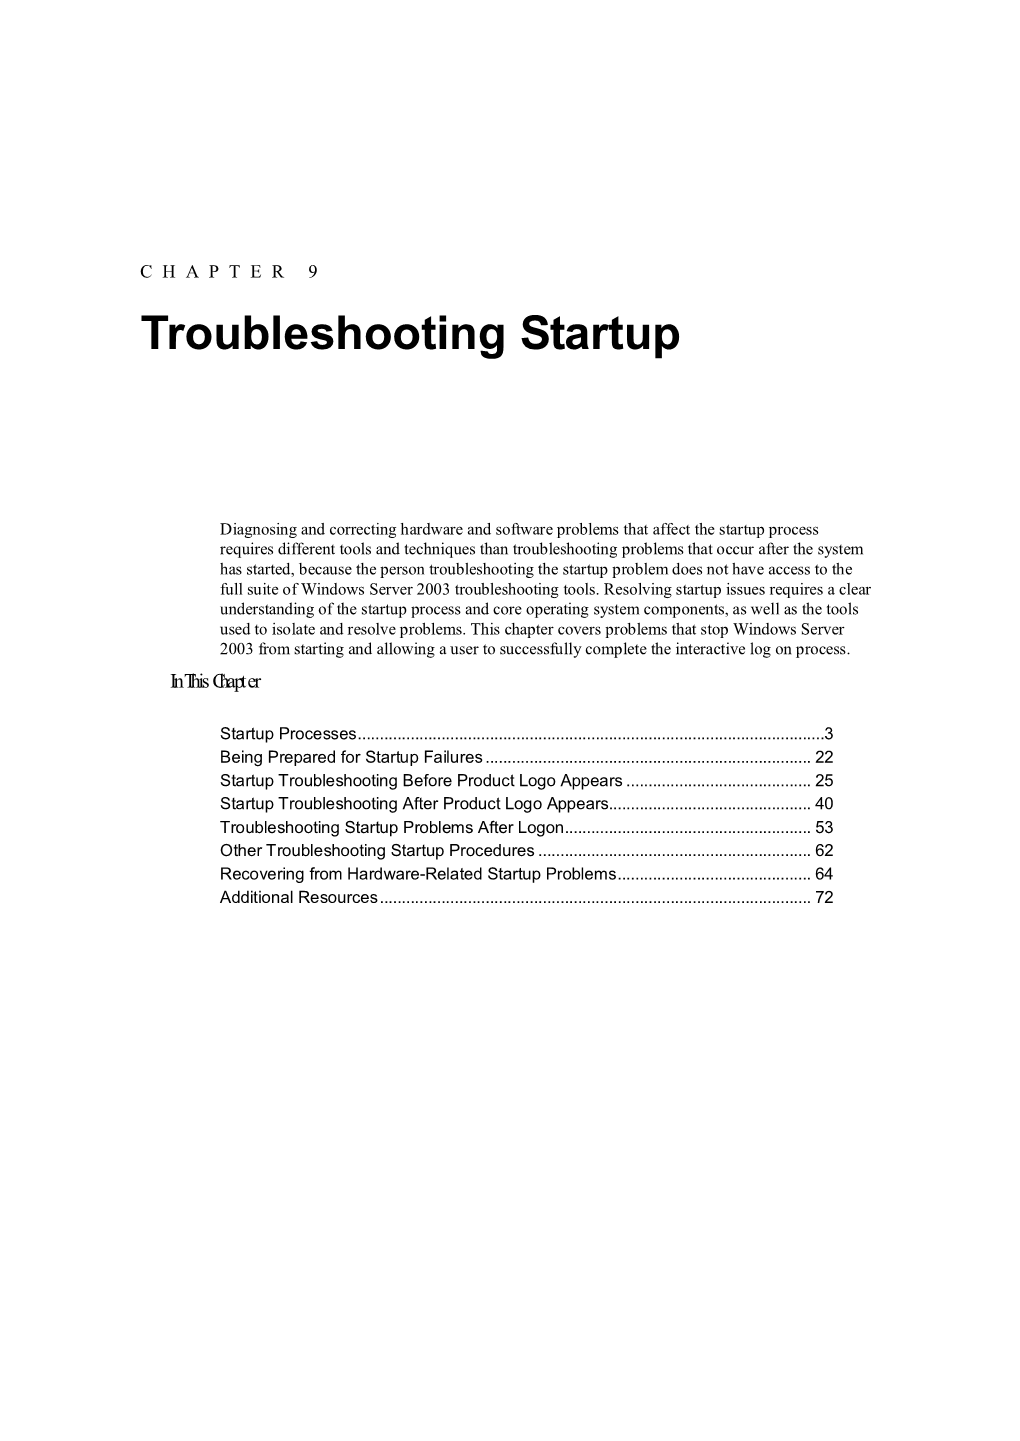 Troubleshooting Startup